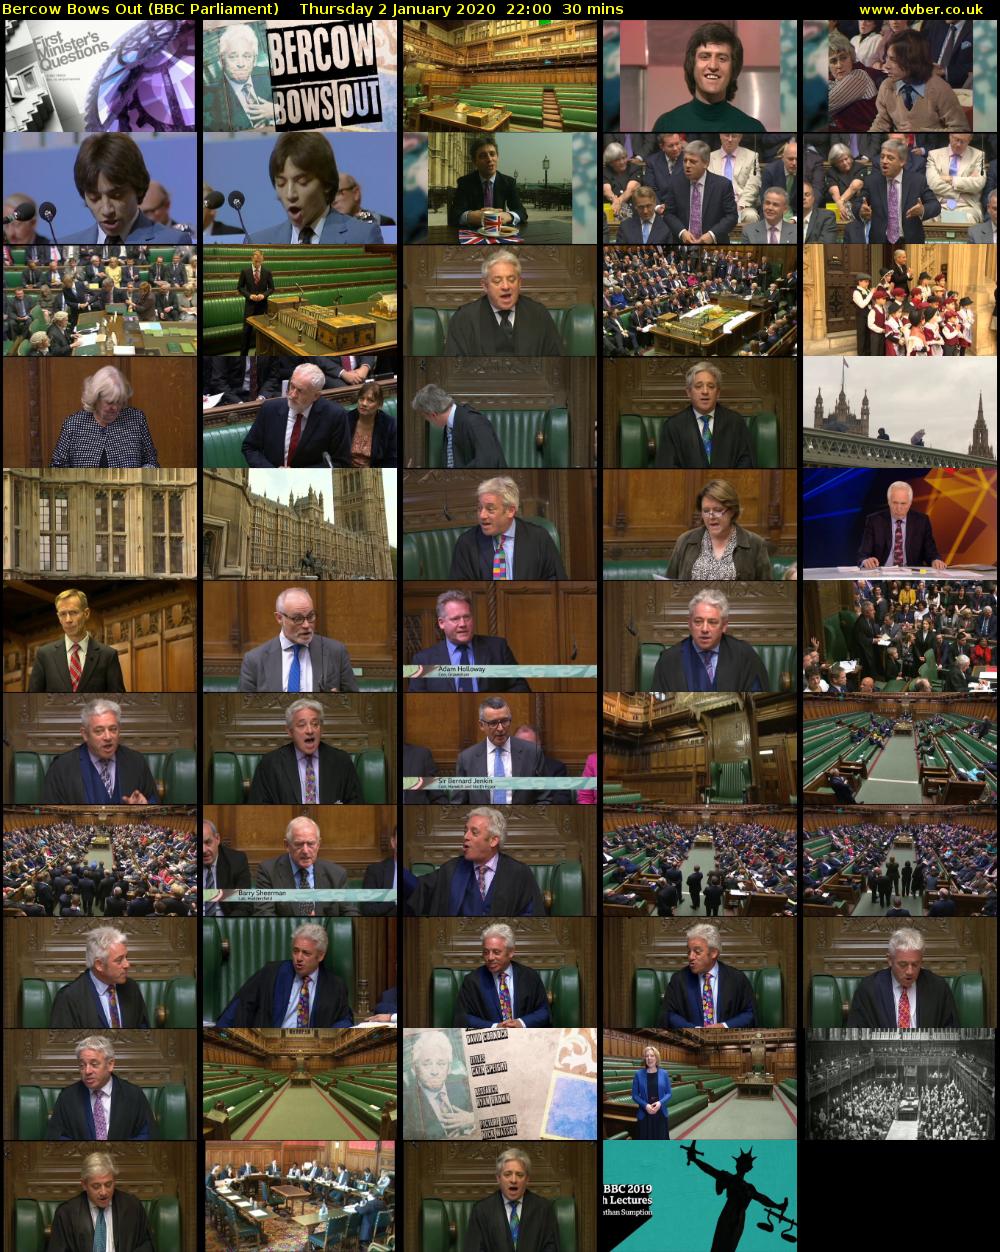 Bercow Bows Out (BBC Parliament) Thursday 2 January 2020 22:00 - 22:30